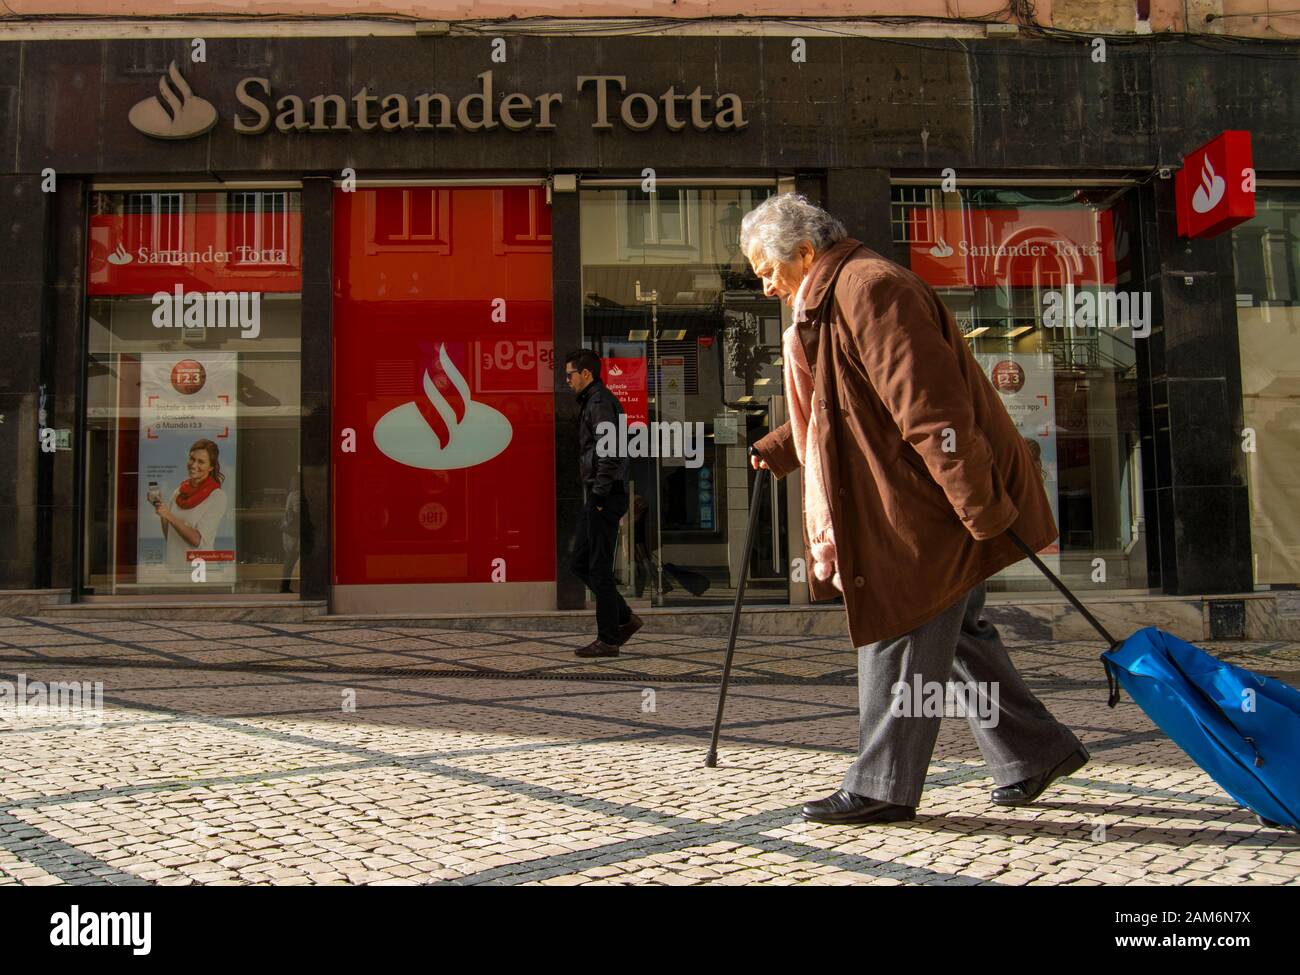 People pass by a branch of the Santander Totta bank in Coimbra Portugal Stock Photo